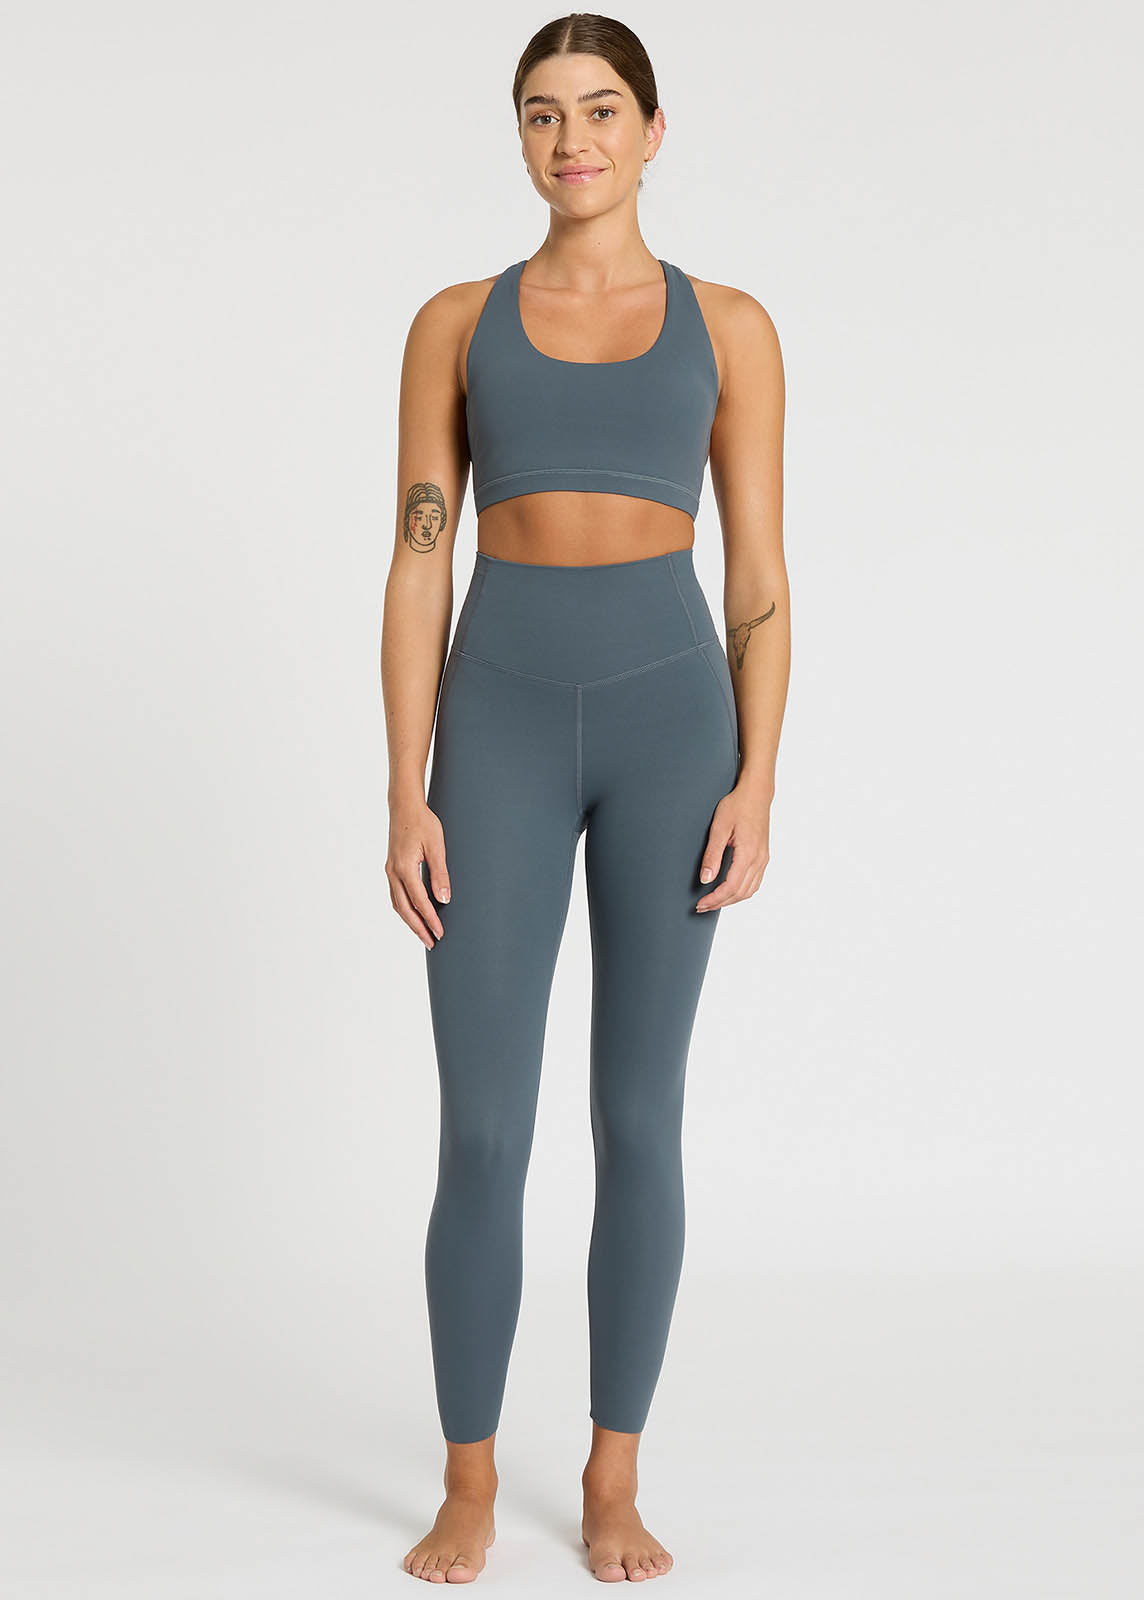 Women's Effortless Support High-Rise 7/8 Leggings - All In Motion™ Taupe XS